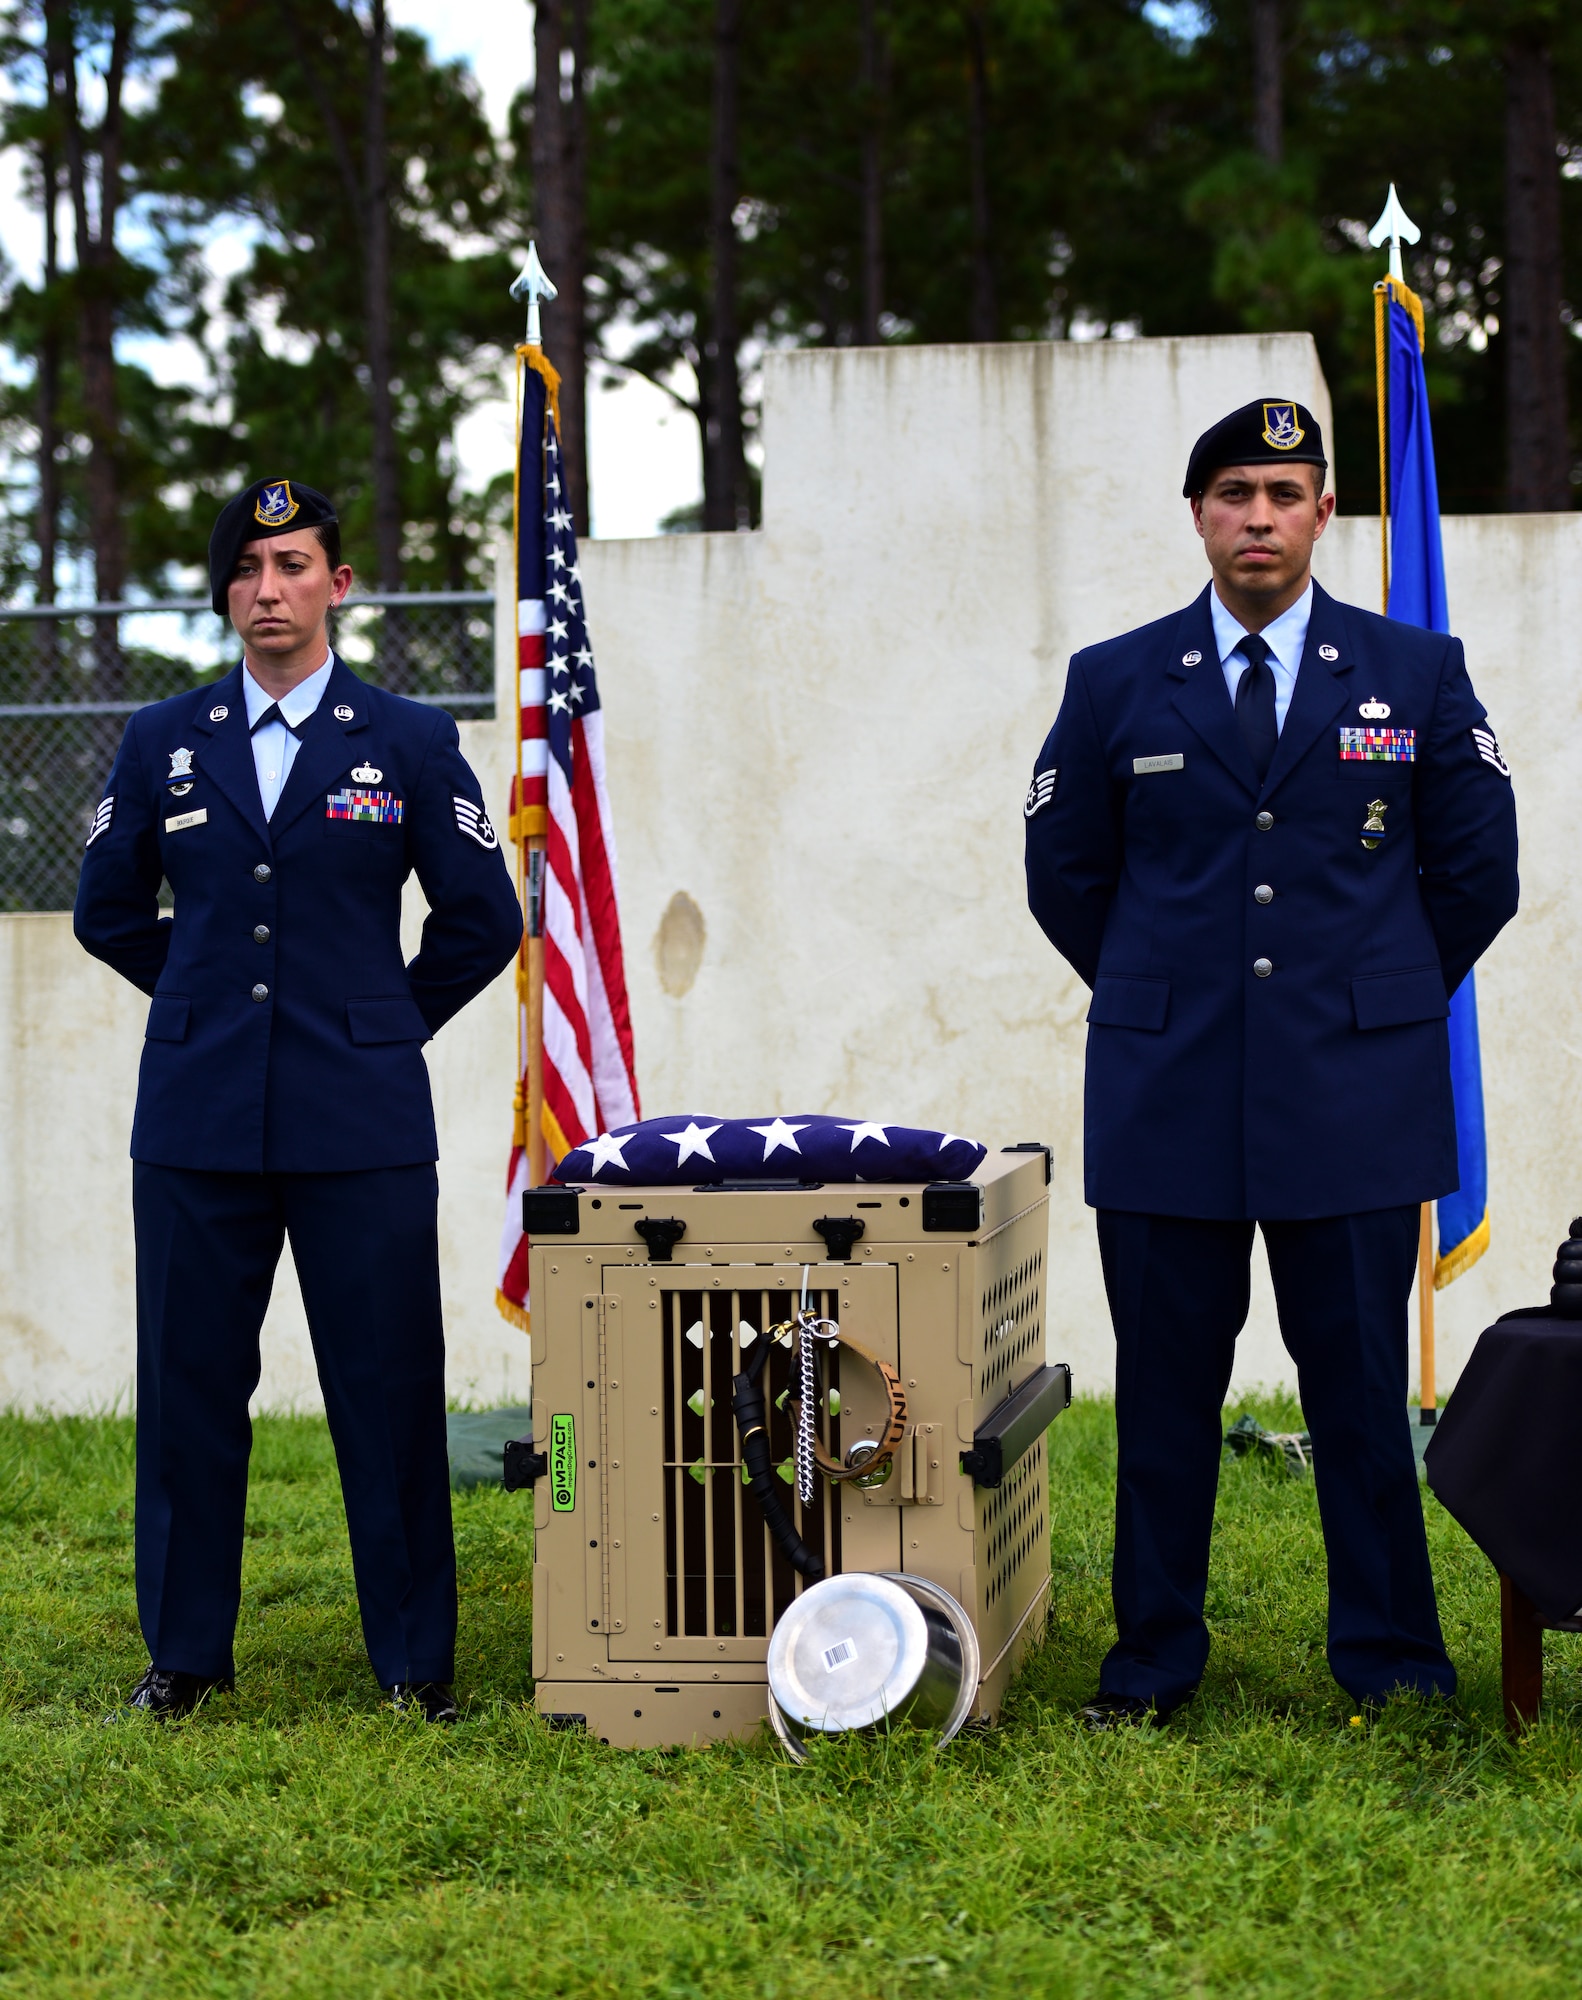 U.S. Air Force Staff Sgt. Caitlin Bourque, left, and Staff Sgt. Marcus Lavalais, right, 325th Security Forces Squadron military working dog (MWD) handlers, stand alongside the effects of MWD Jack during Jack’s memorial service at Tyndall Air Force Base, Fla., Sept. 7, 2018. Jack was an explosives and patrol dog who shared a special bond with his handlers. MWDs enhance security forces capabilities to protect resources, enforce military laws, suppress drugs, detect explosives and protect installations. (U.S. Air Force photo by Senior Airman Isaiah J. Soliz)